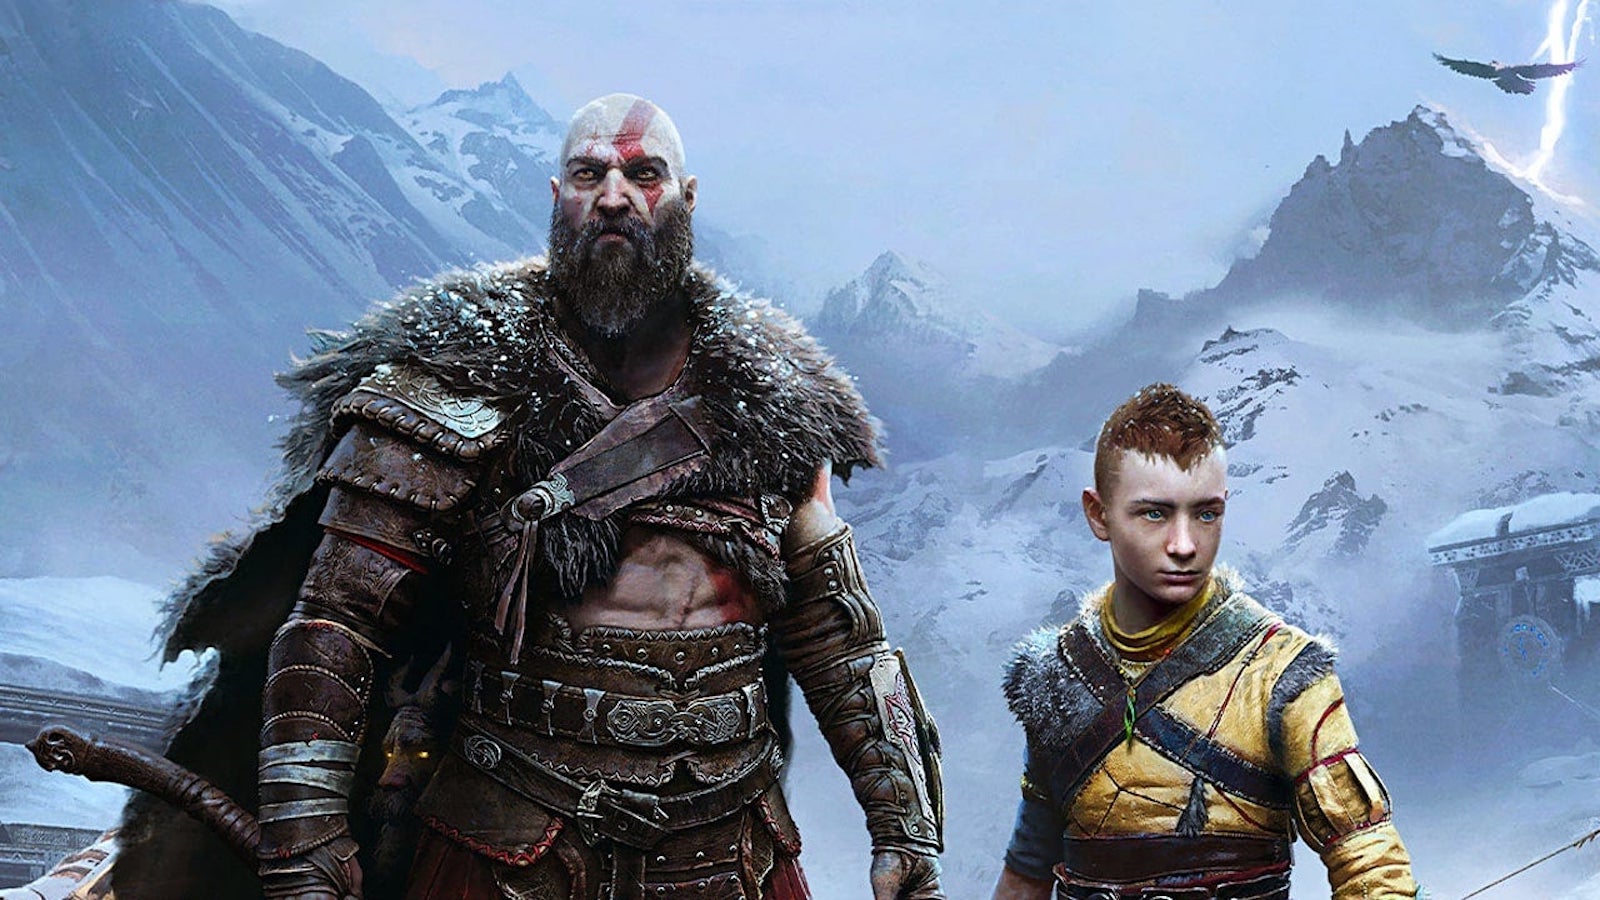 Who is the voice actor of Atreus in God of War Ragnarok?